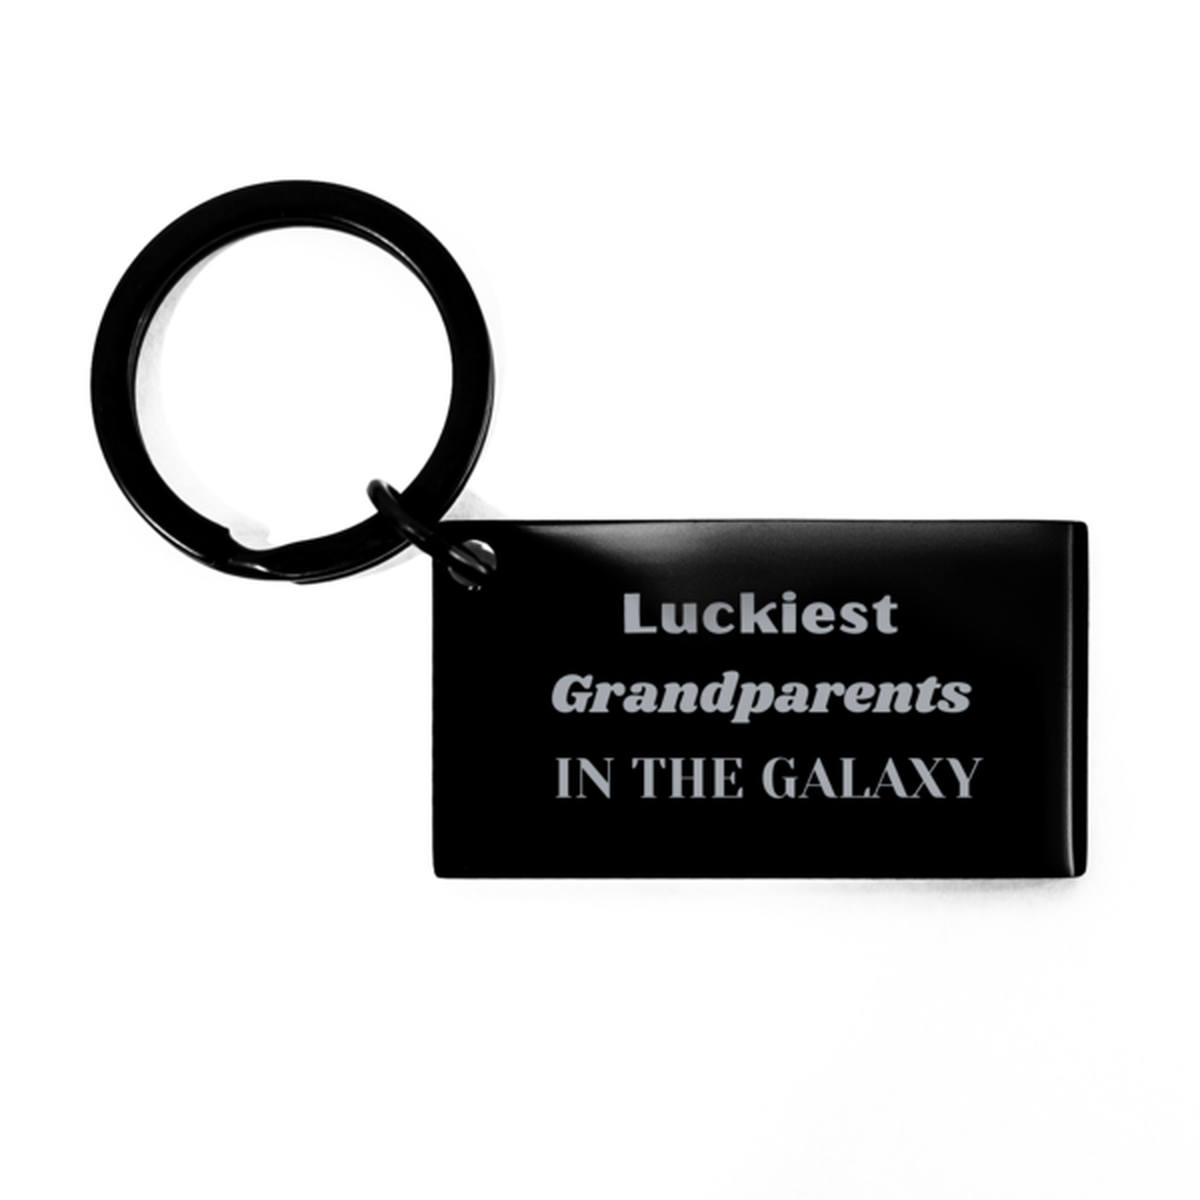 Luckiest Grandparents in the Galaxy, To My Grandparents Engraved Gifts, Christmas Grandparents Keychain Gifts, X-mas Birthday Unique Gifts For Grandparents Men Women